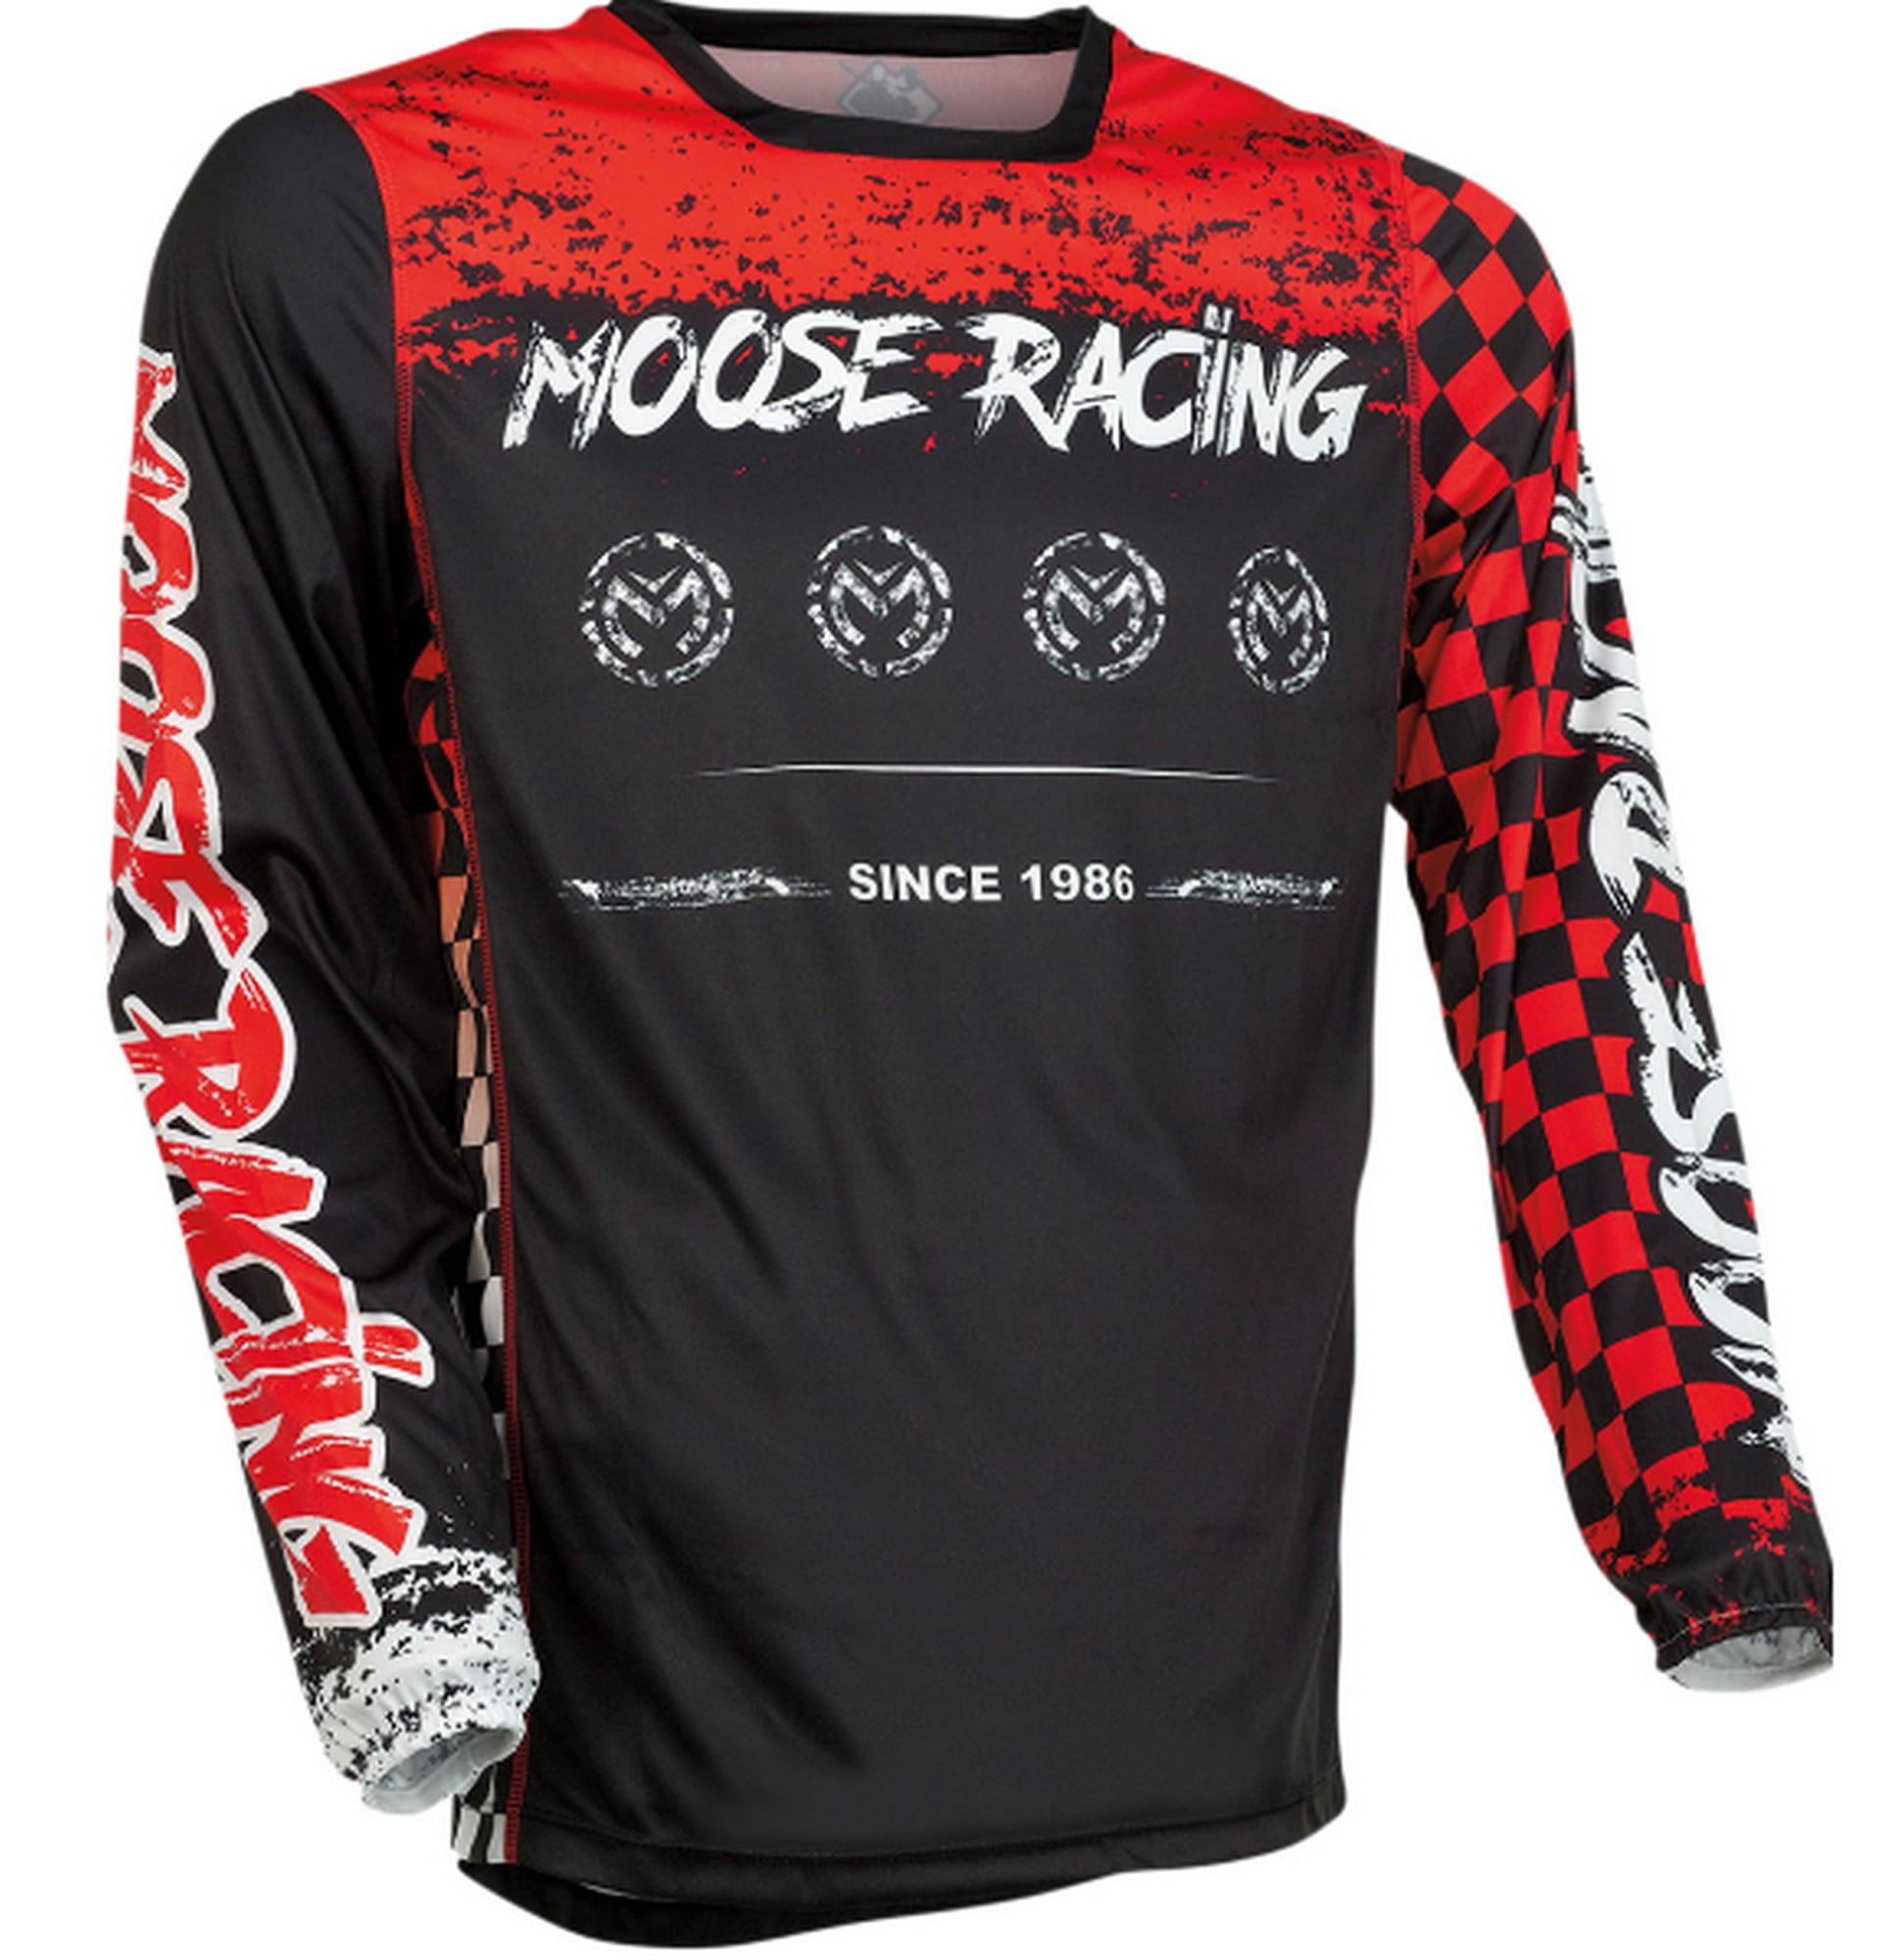 Adult sizes available Fox 180 Race Red Motocross MX Offroad Jeans Shirt 